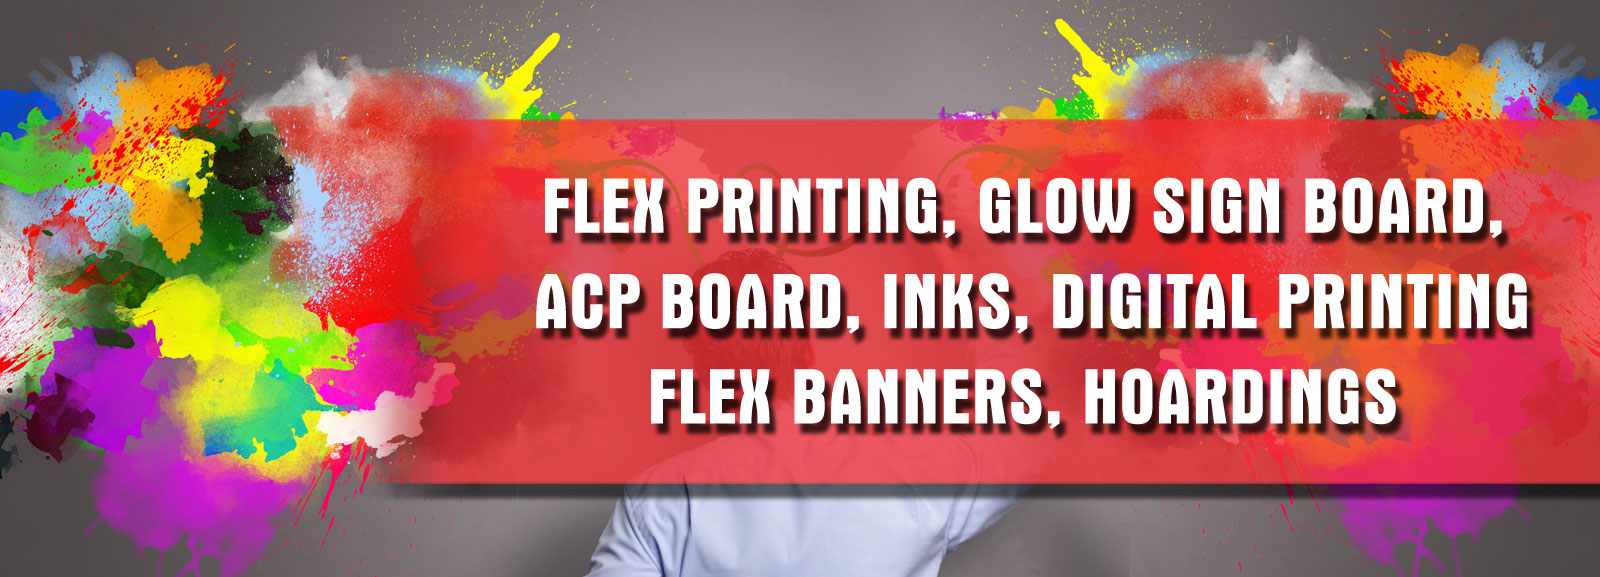 Glow Signs Boards Printing in Chandigarh at Lowest Price | Abhishek Glow Signs | Glow Sign Board Printing in Chandigarh,Flex Printing in Chandigarh,ACP board printing in Chandigarh  - GL20831